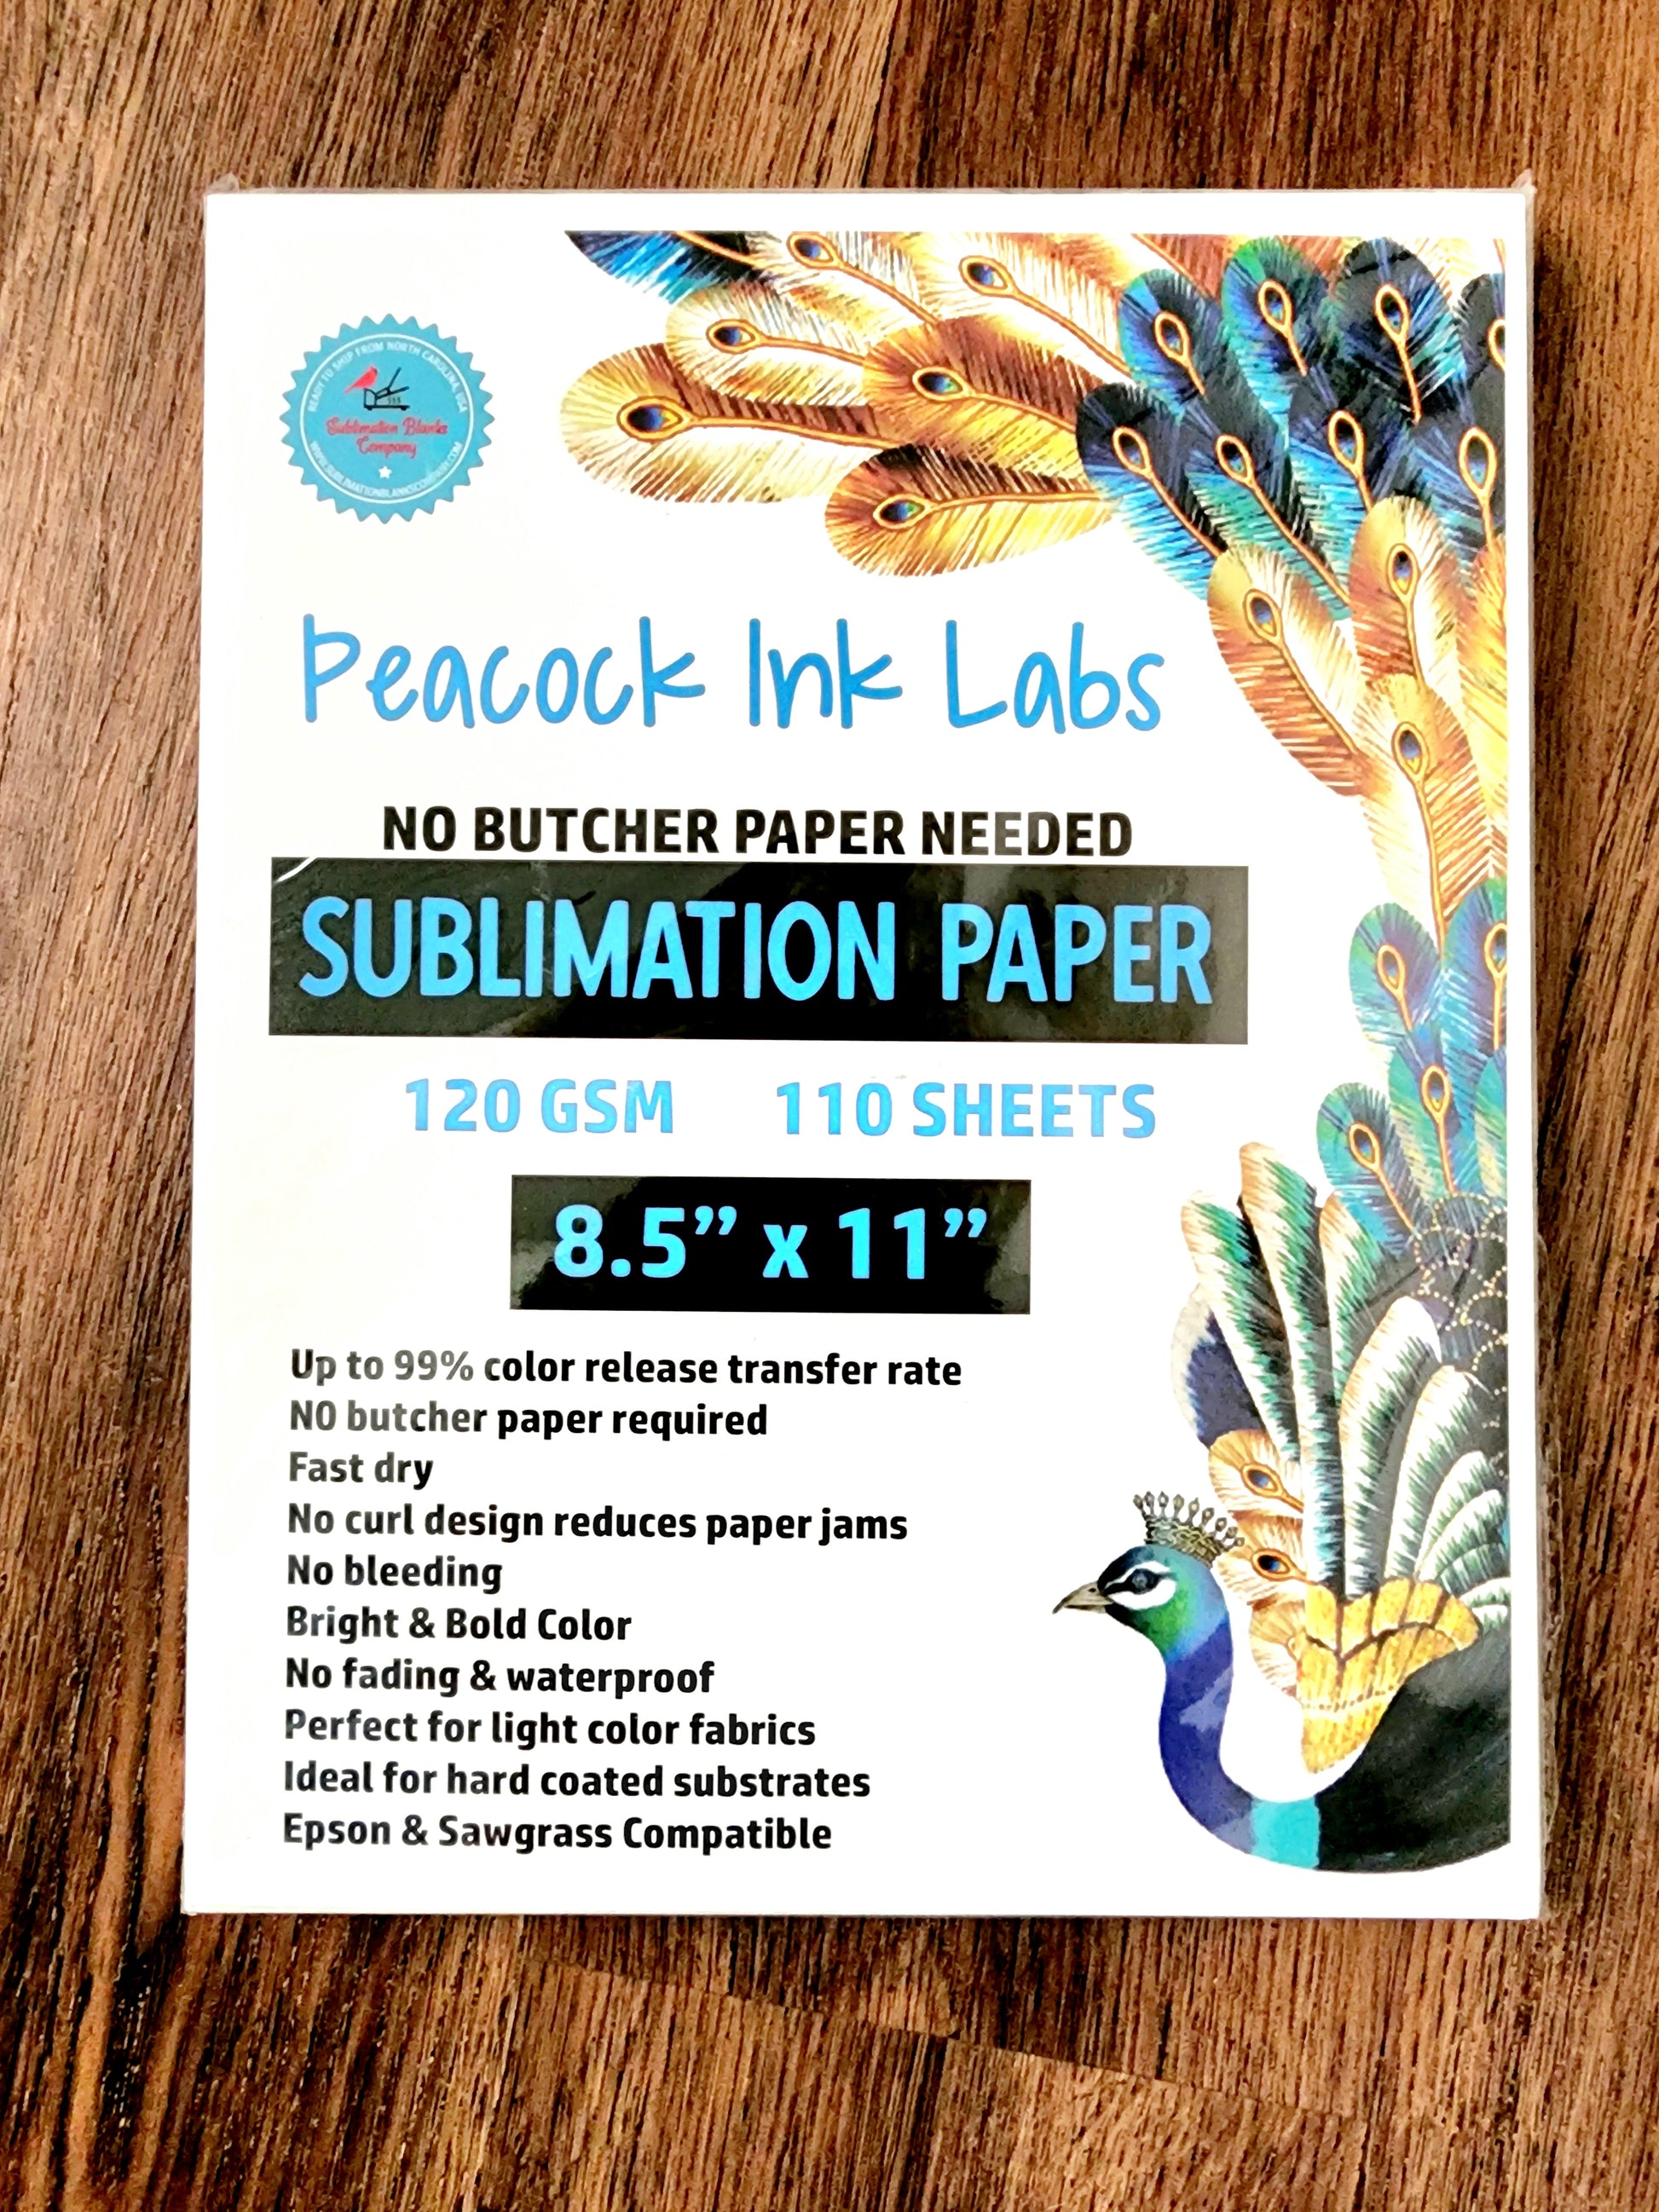 Sublimation Protective Paper: What to use and NOT to use! - Angie